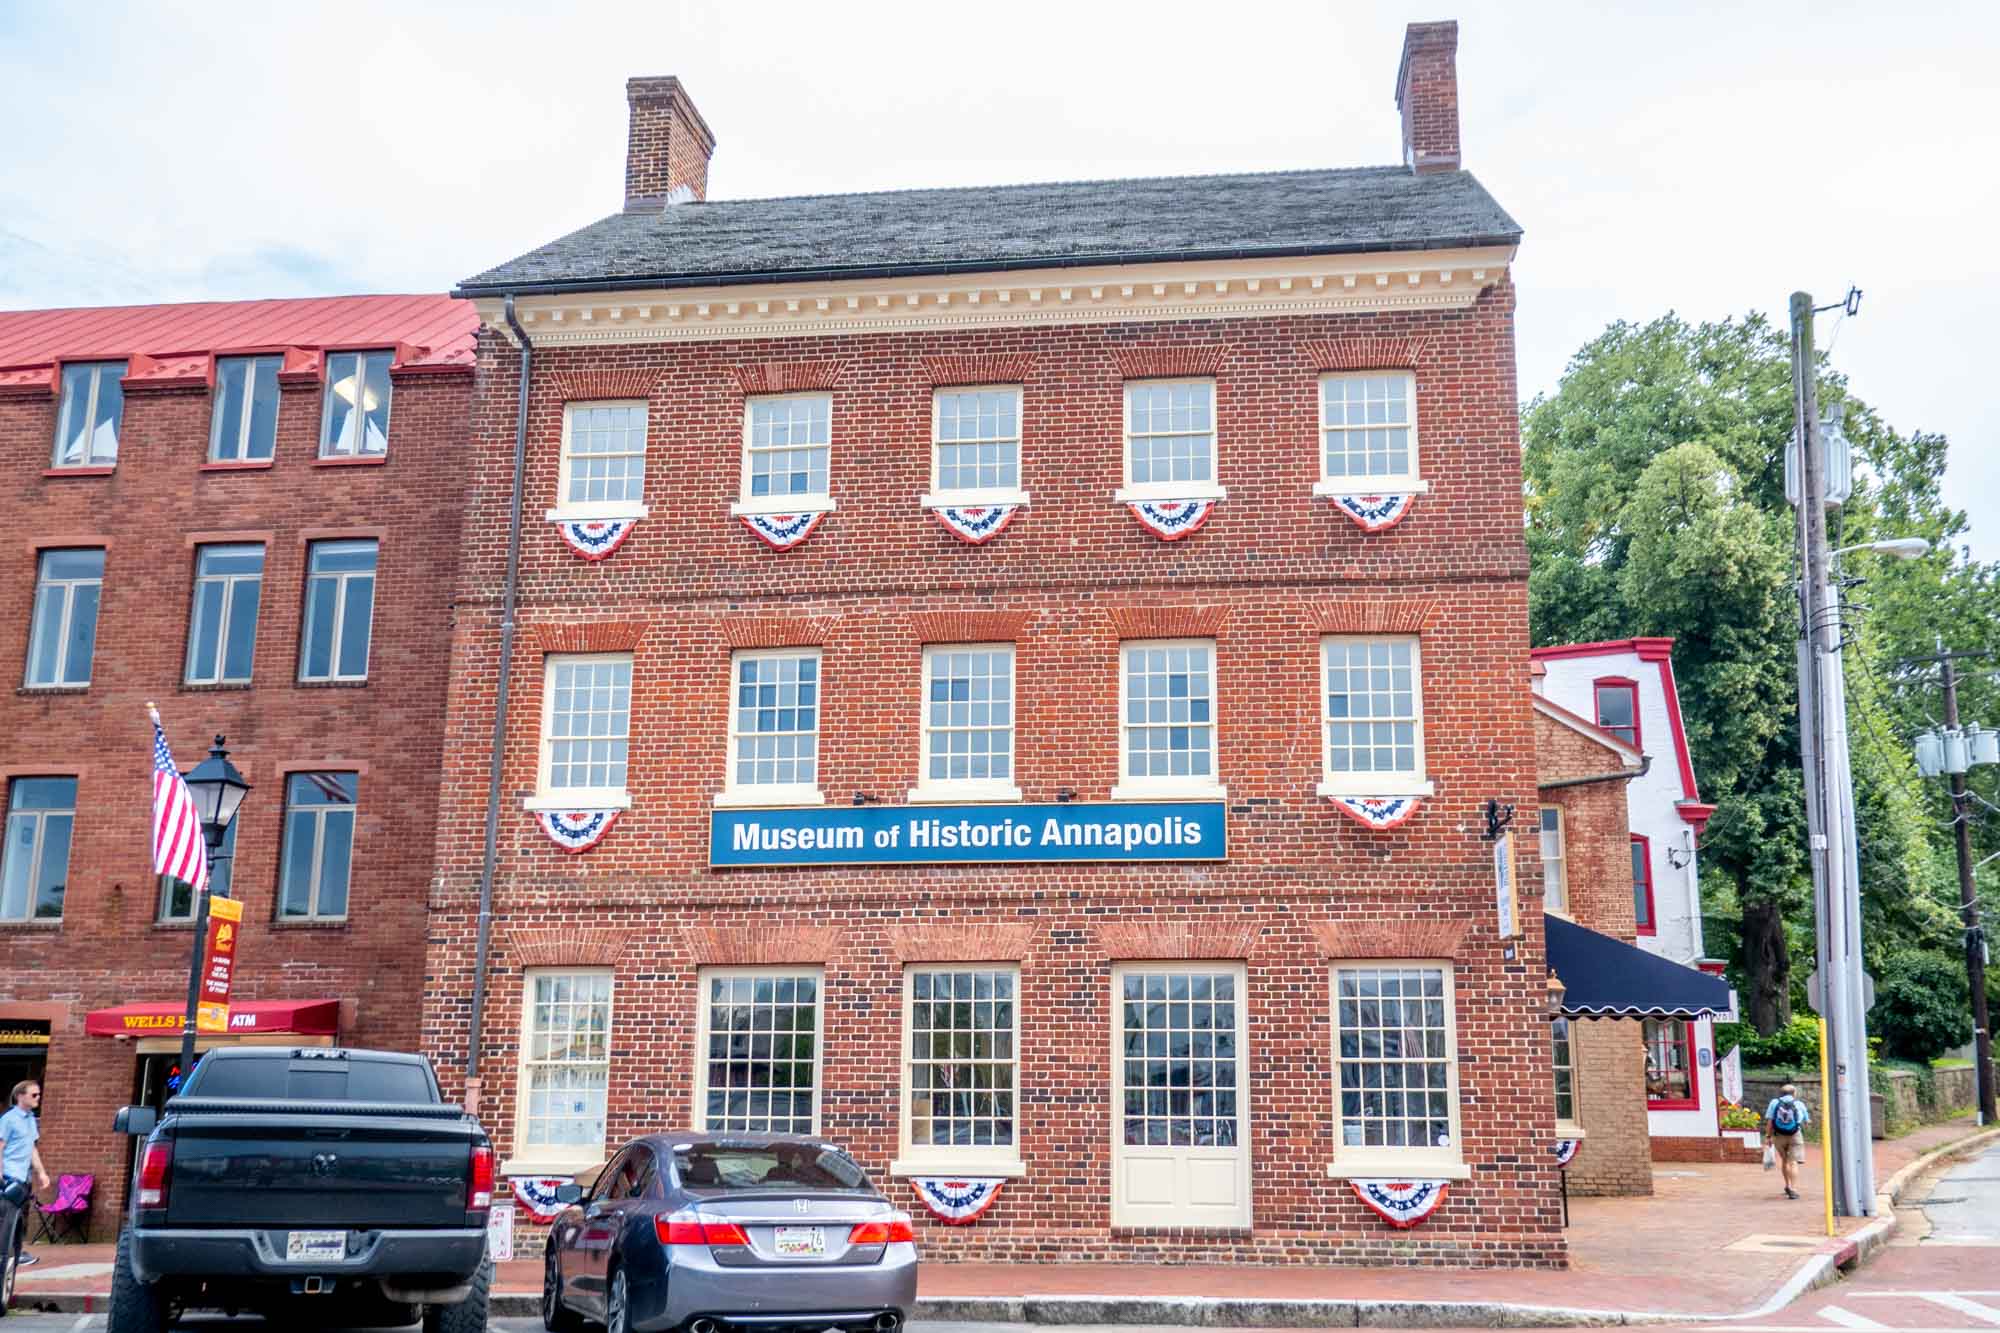 3-story brick building with rows of windows and a sign for "Museum of Historic Annapolis."